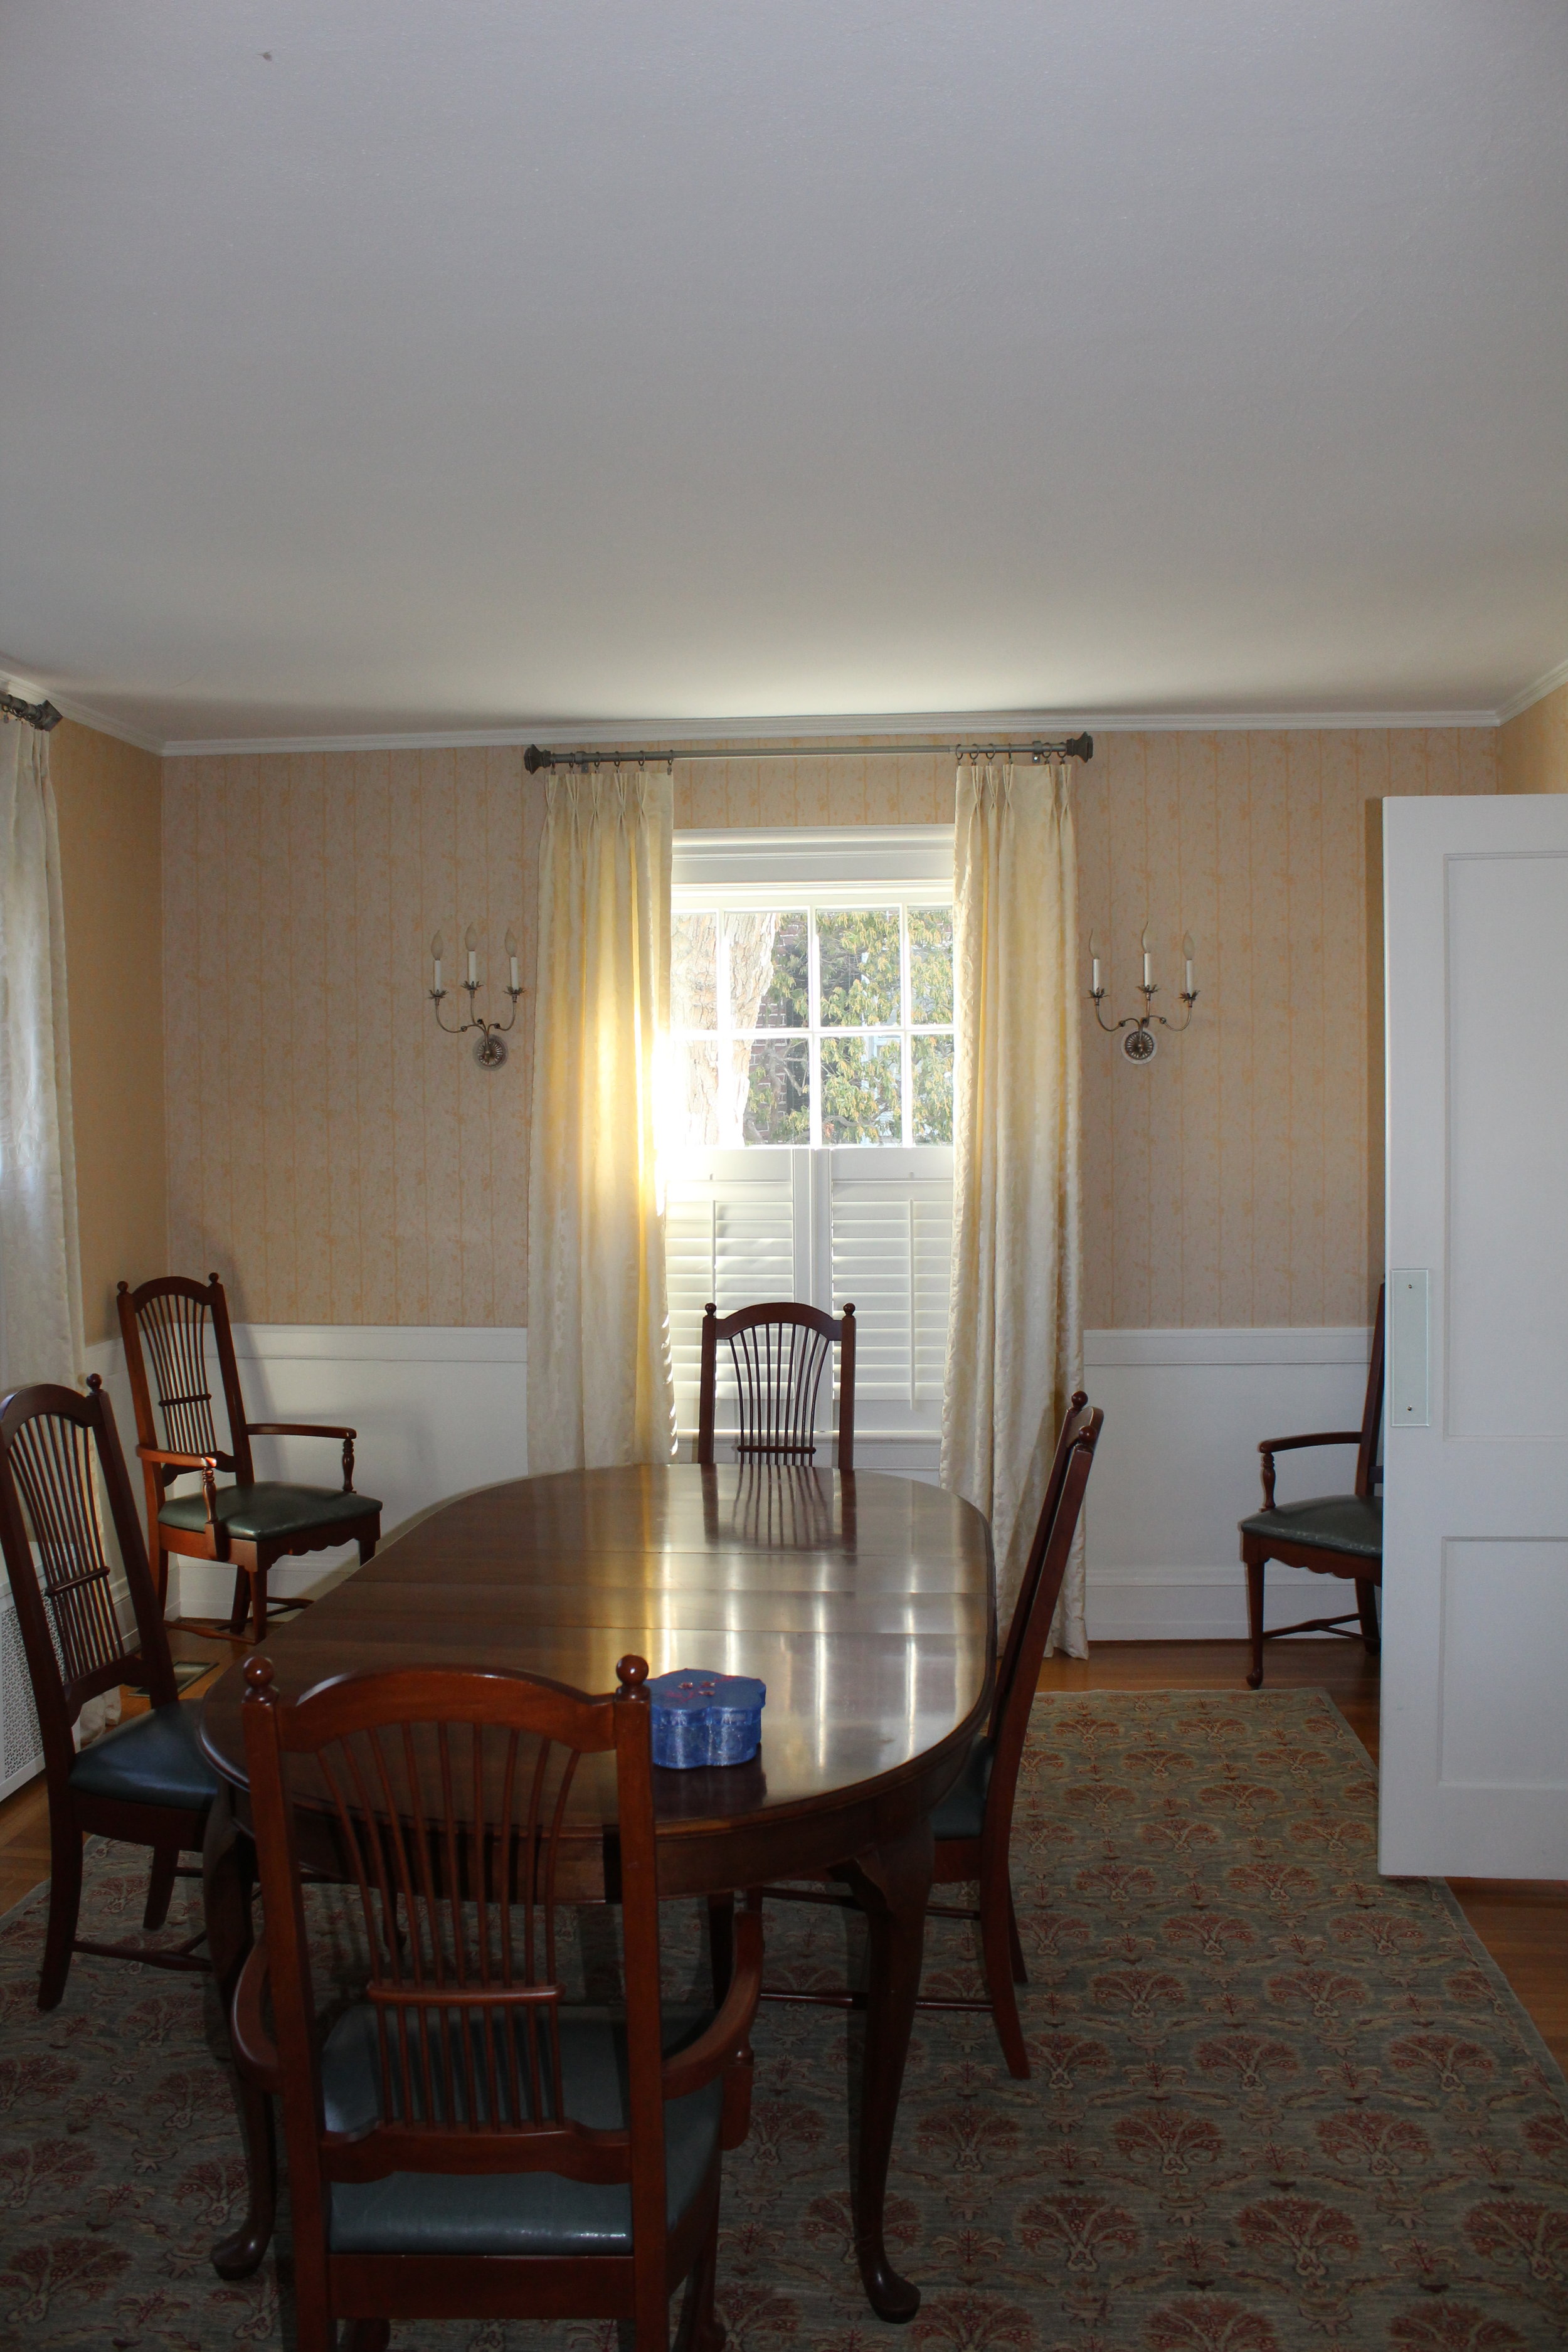 The dining room, full of windows, was far too dark for their liking and isolated from the rest of the first floor.